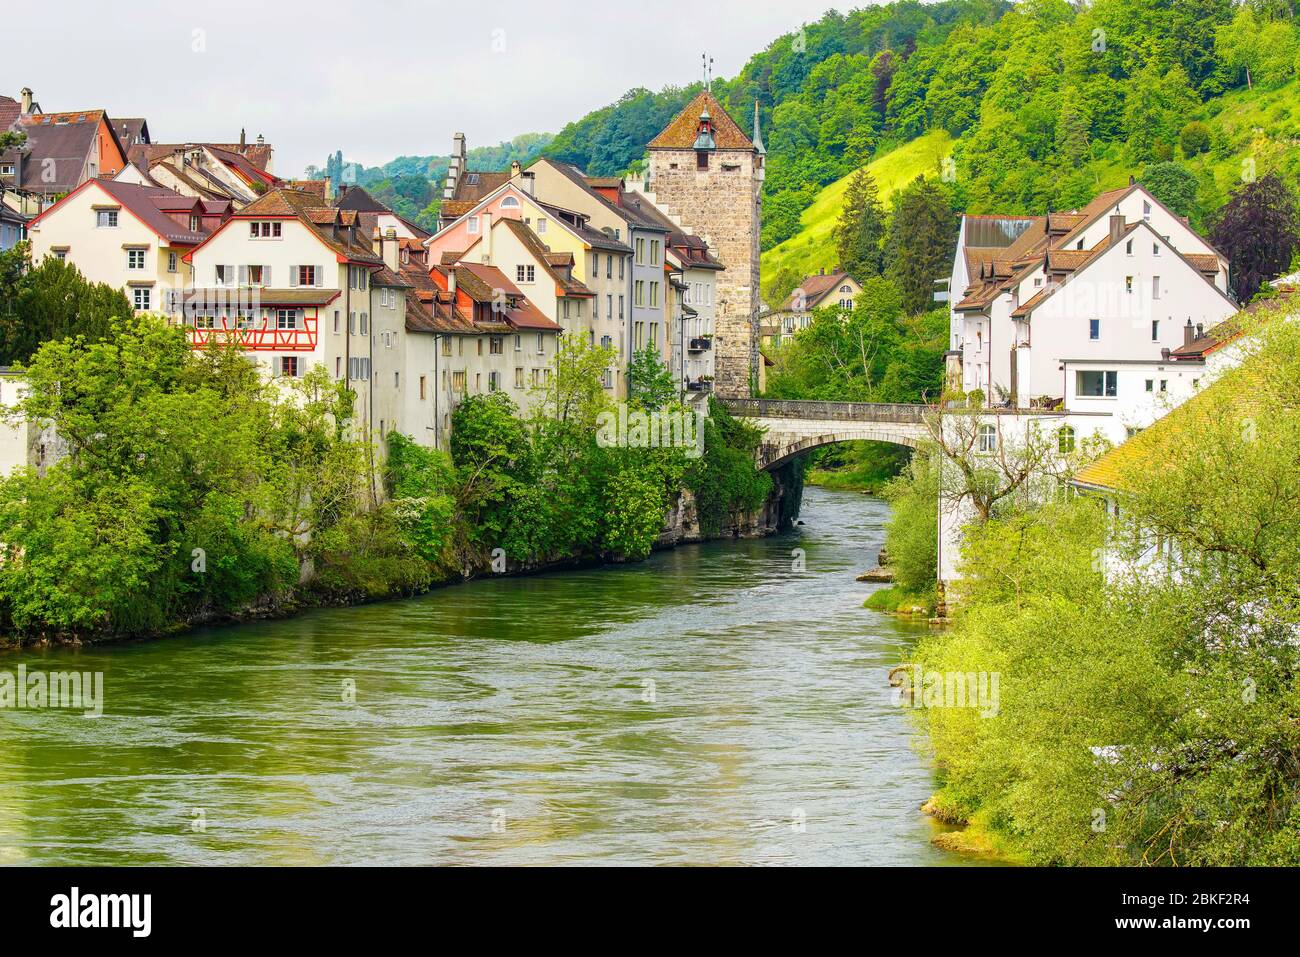 The Black Tower and Aare river in the historic old town of Brugg, Switzerland. Stock Photo